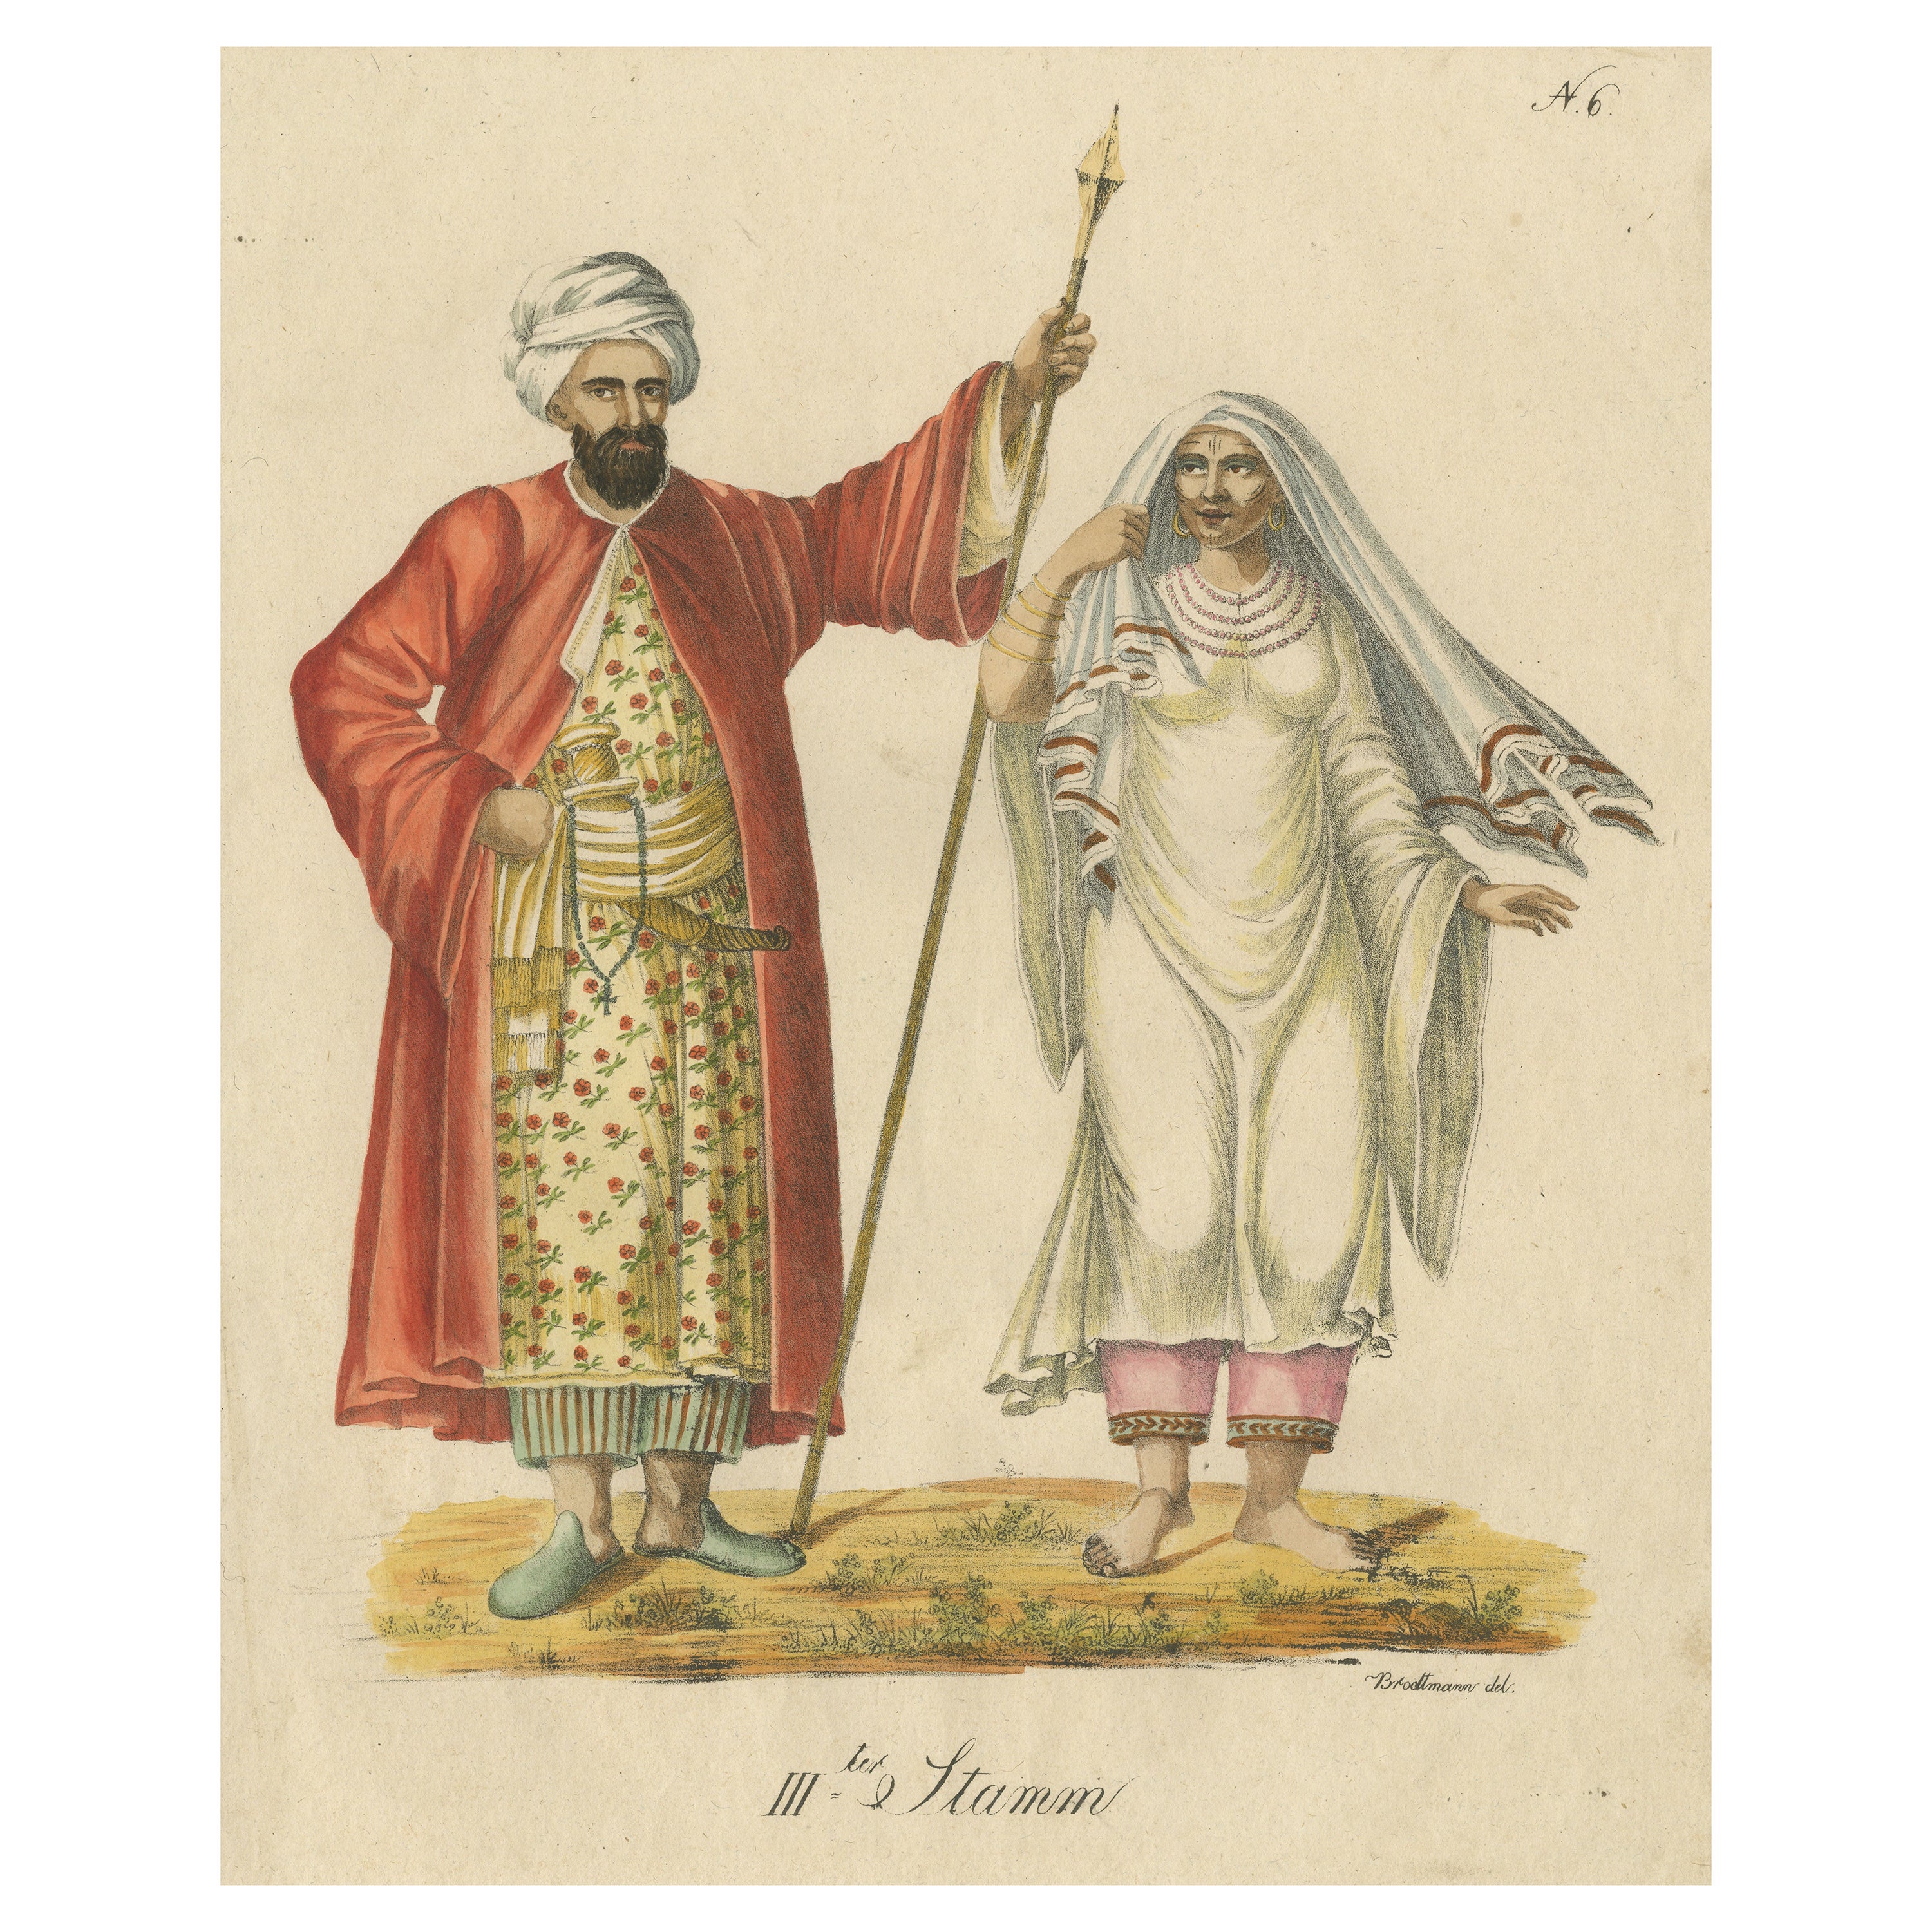 Antique Print of an Arab Man and Woman